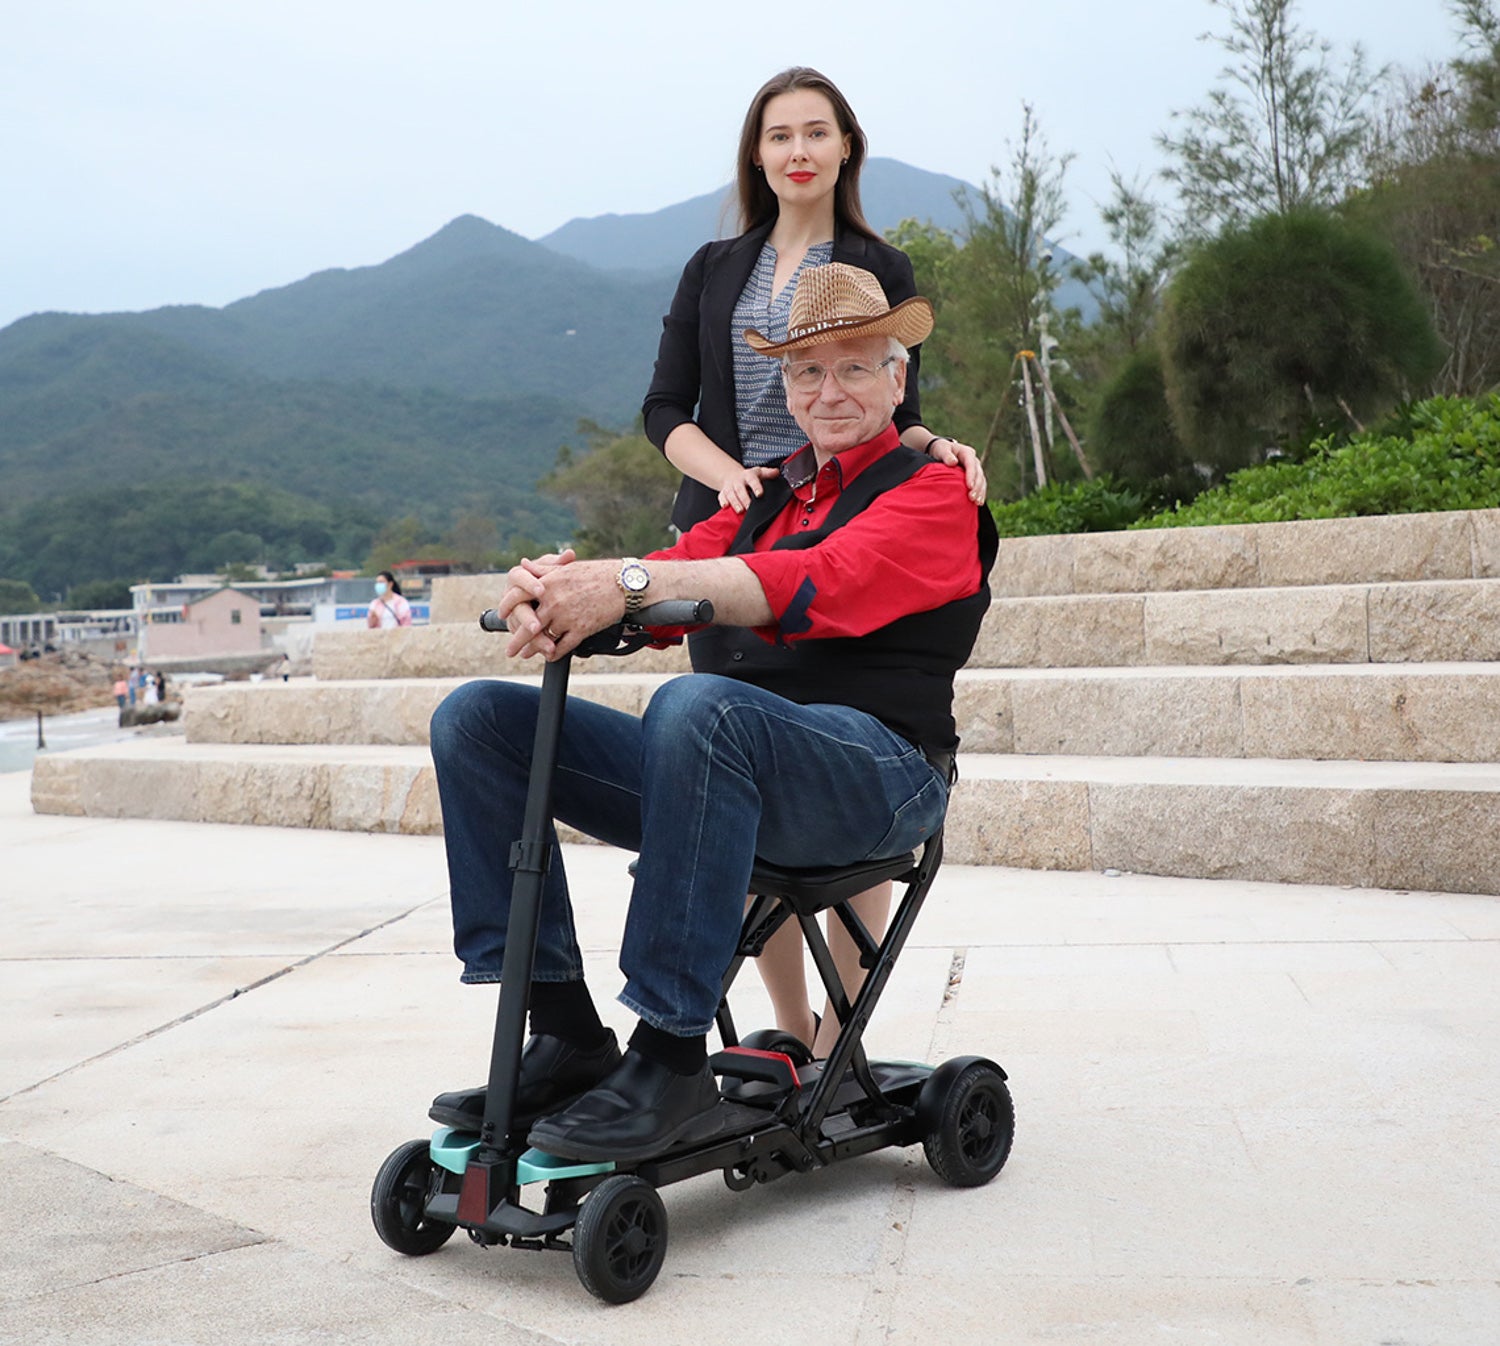 Drive Autofold Elite Folding Mobility Scooter with Suspension